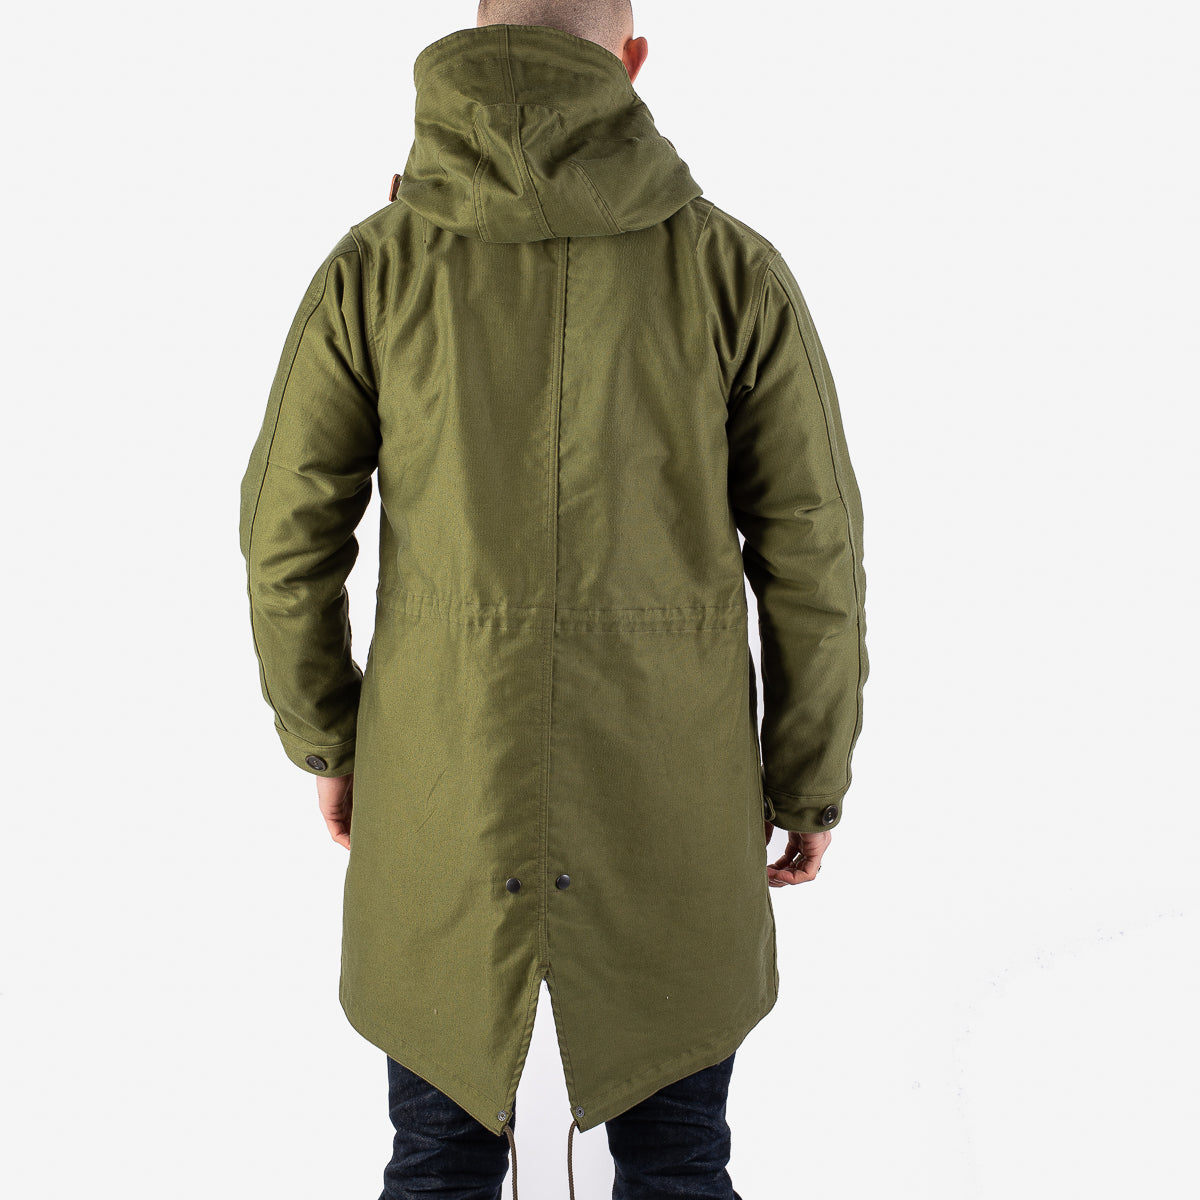 Coat M-51 IHM-34 Olive Whipcord Field Iron Heart Drab –